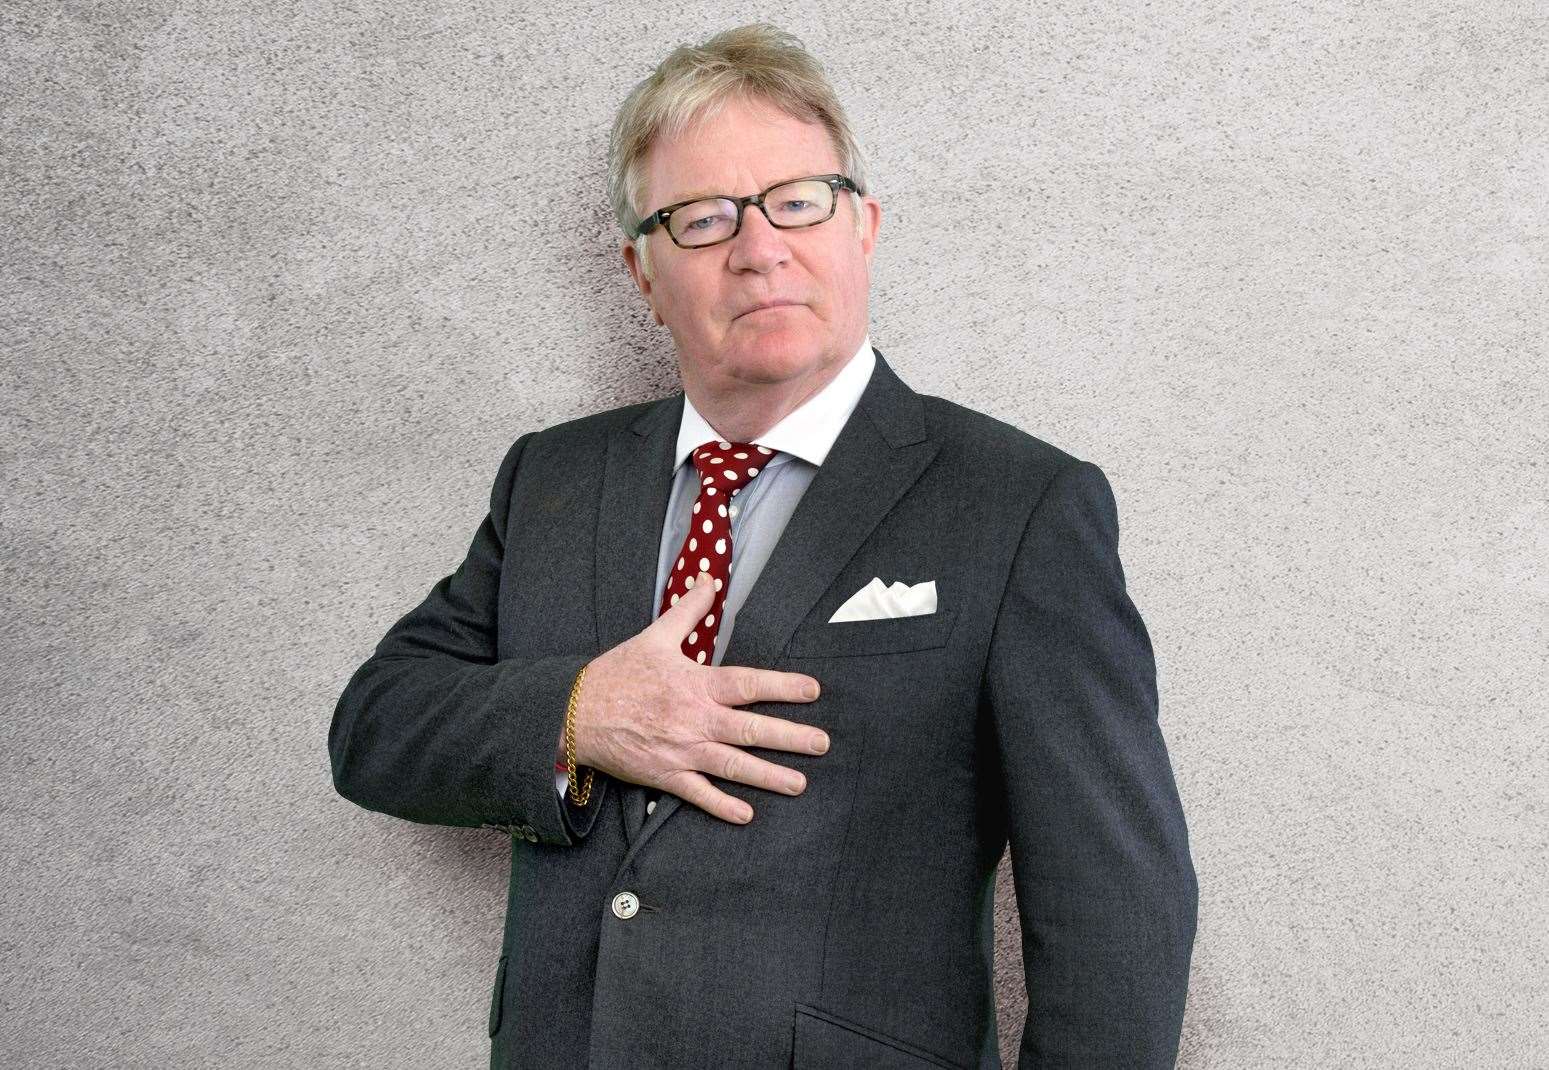 Jim Davidson walked out of an interview with Ashley Banjo is which, he claims he was edited to be 'the bad guy'